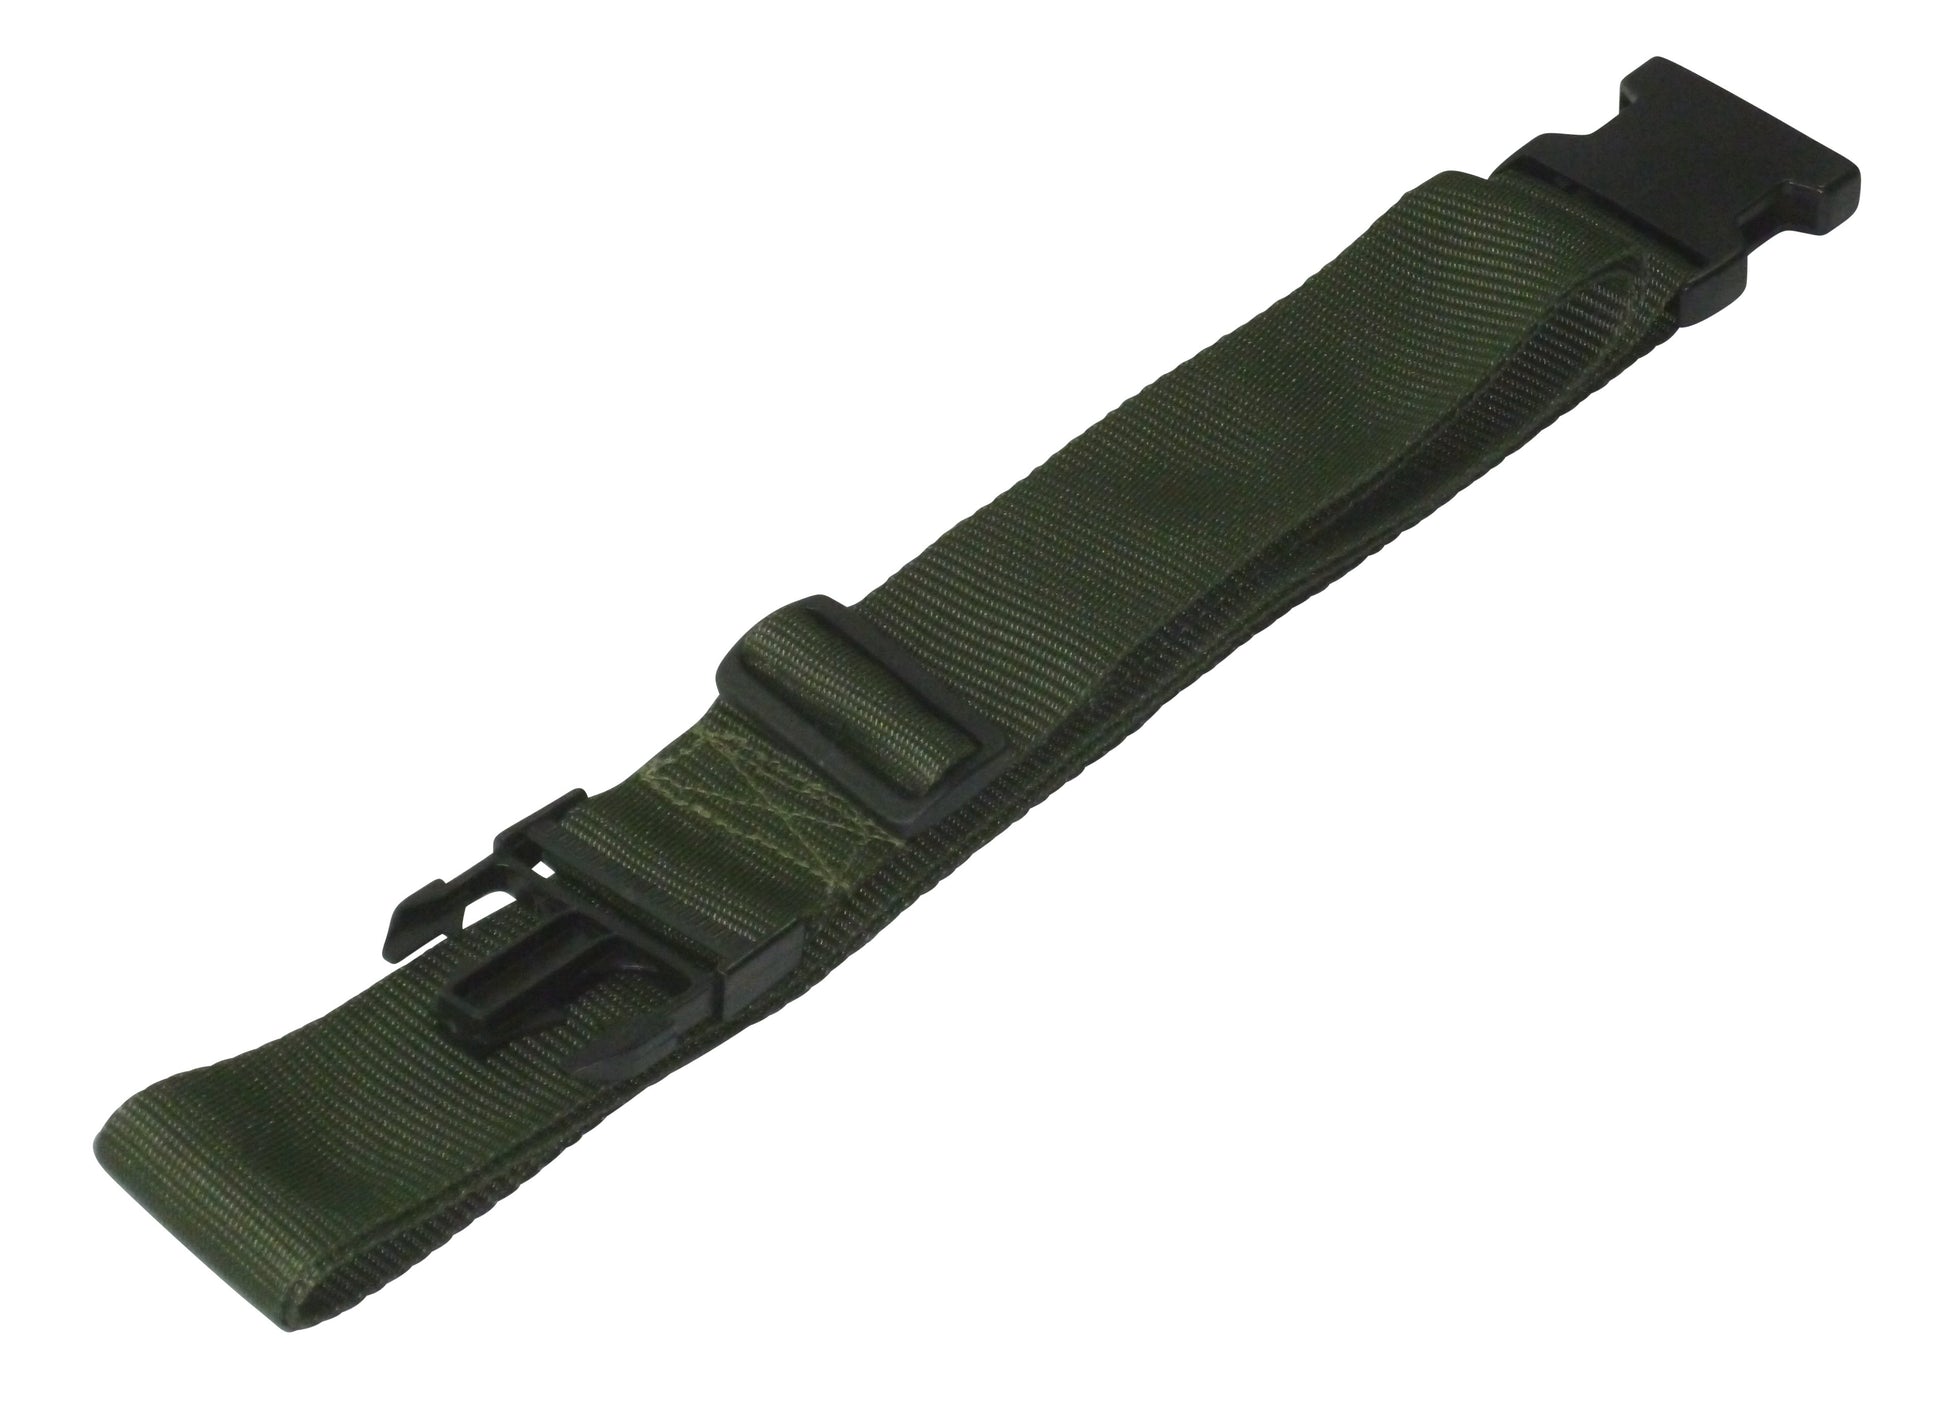 Benristraps Luggage Strap in olive green